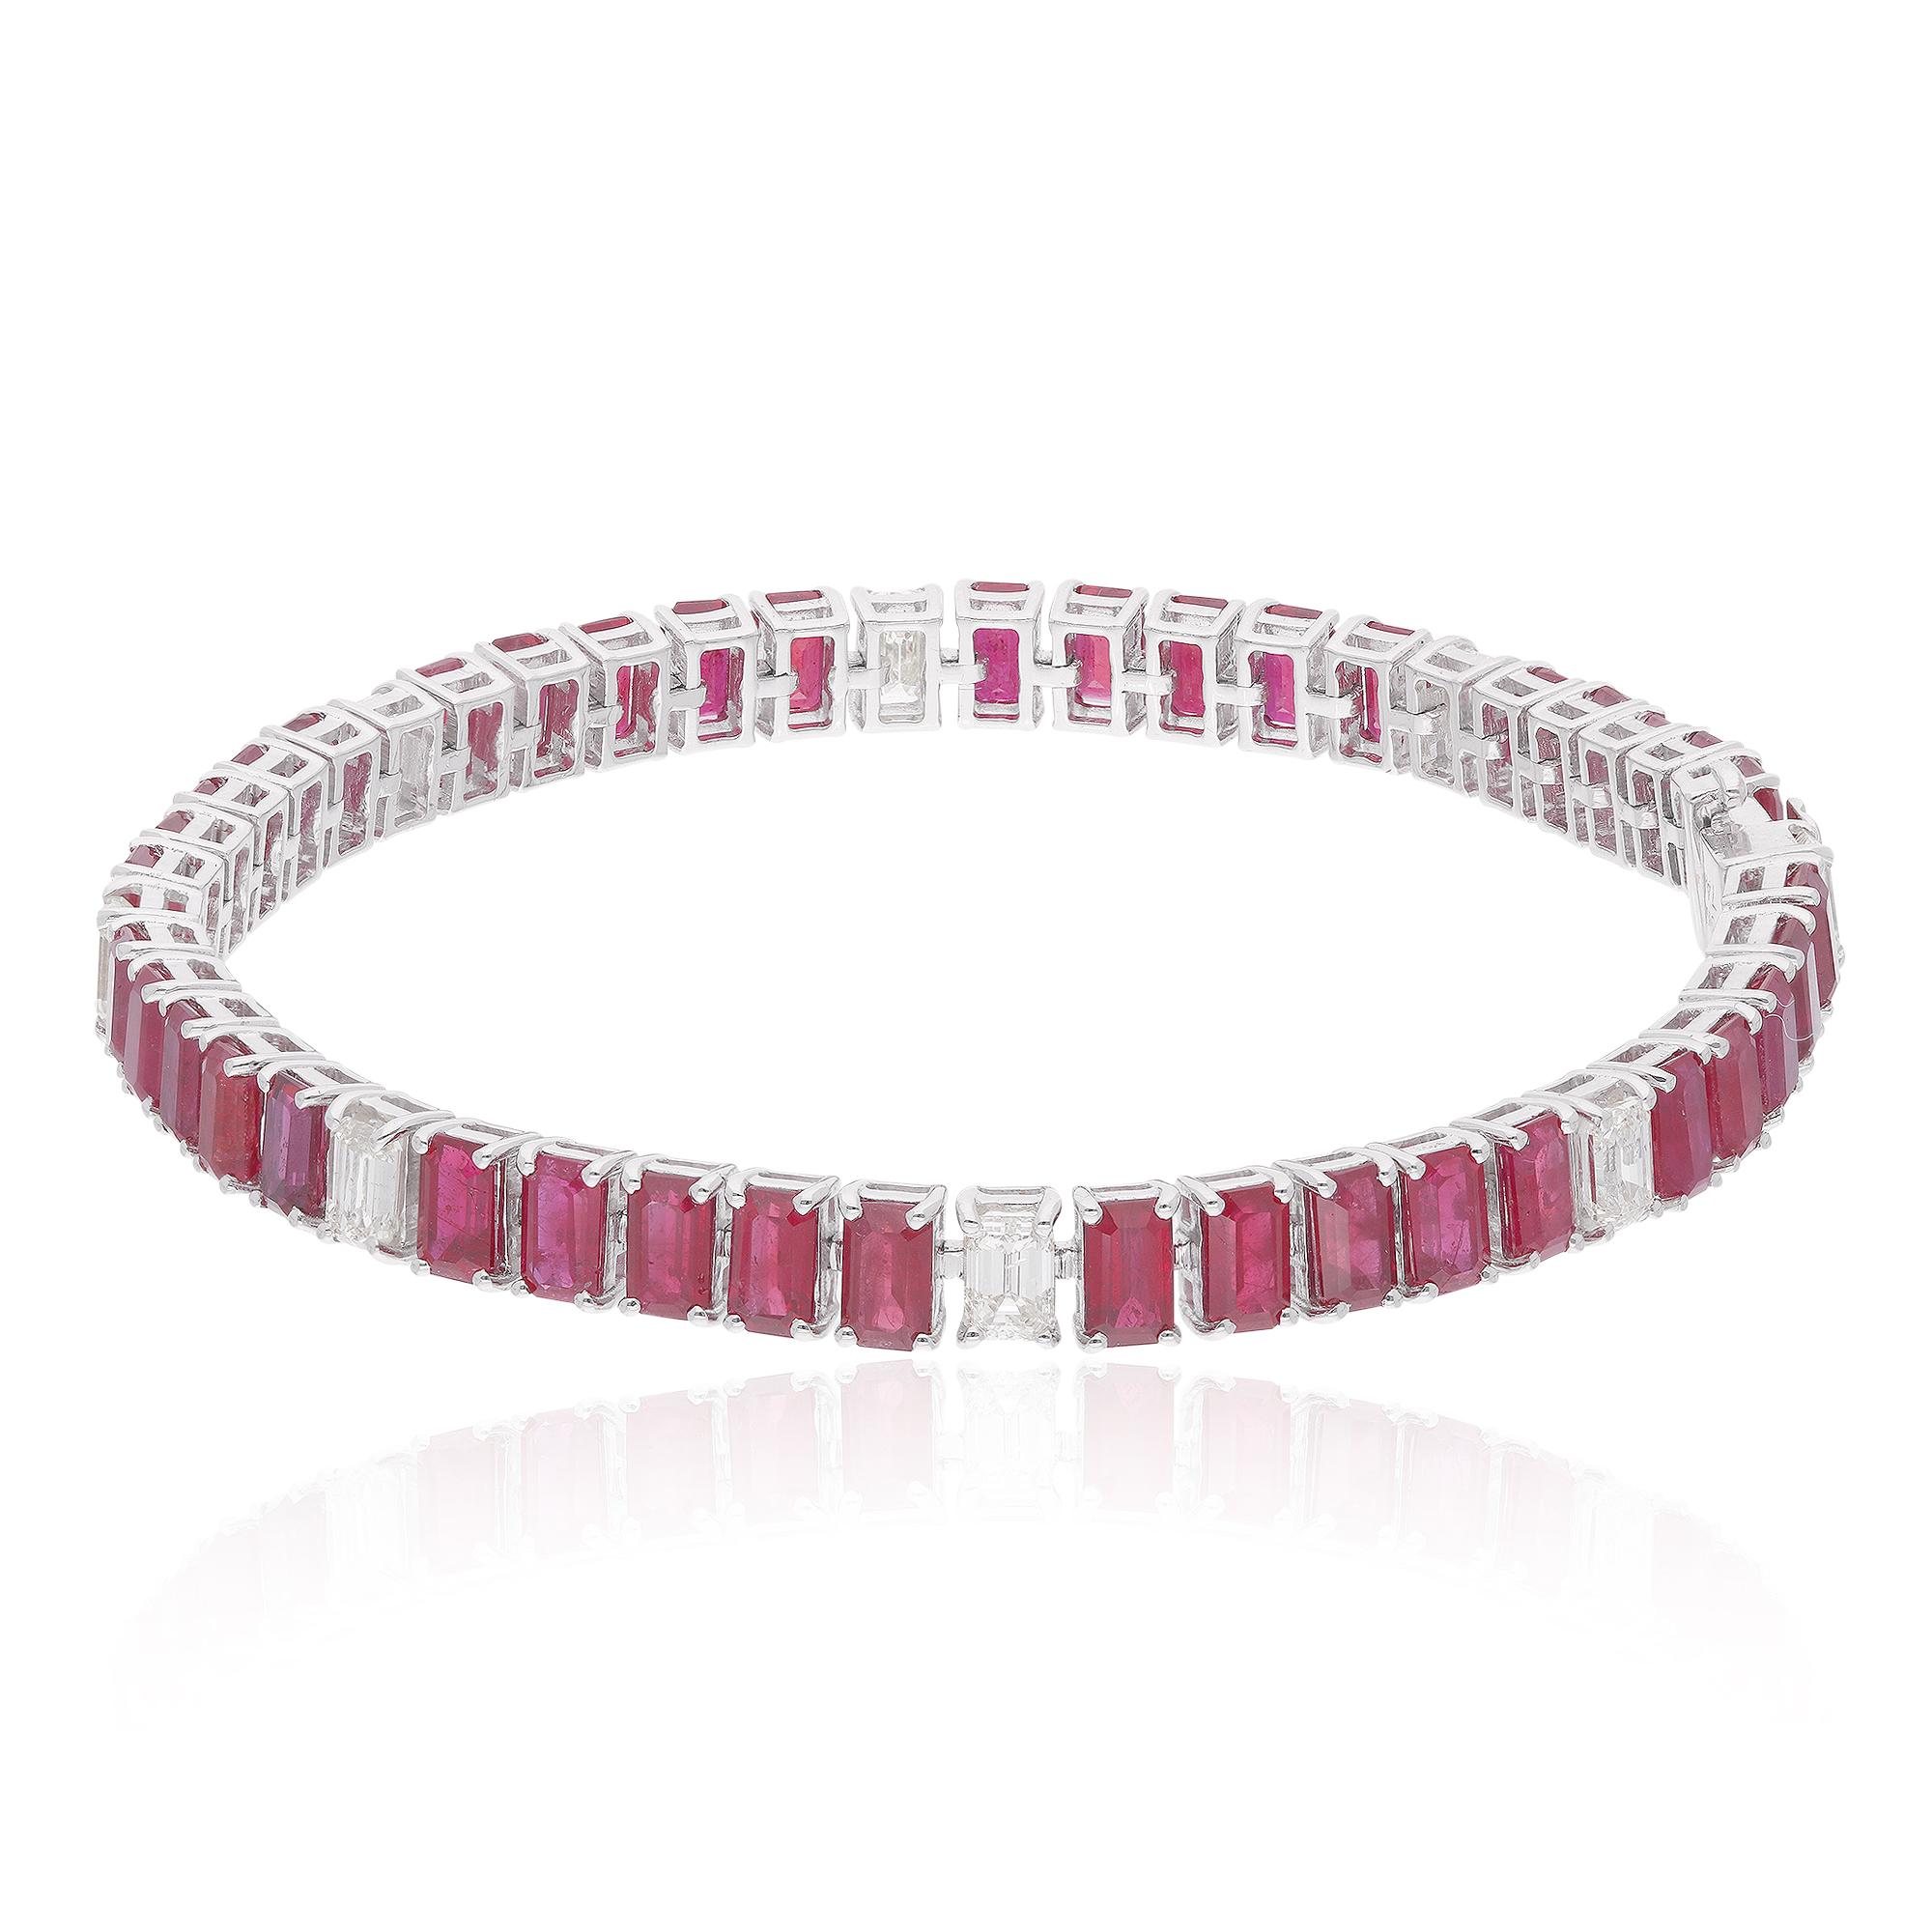 Item Code :- SEBR-43493
Gross Wt. :- 16.34 gm
18k Solid White Gold Wt. :- 12.94 gm
Natural Diamond Wt. :- 2.13 Ct. ( AVERAGE DIAMOND CLARITY SI1-SI2 & COLOR H-I )
Natural Ruby Wt. :- 14.89 Ct.
Bracelet Length :- 7 Inches Long

✦